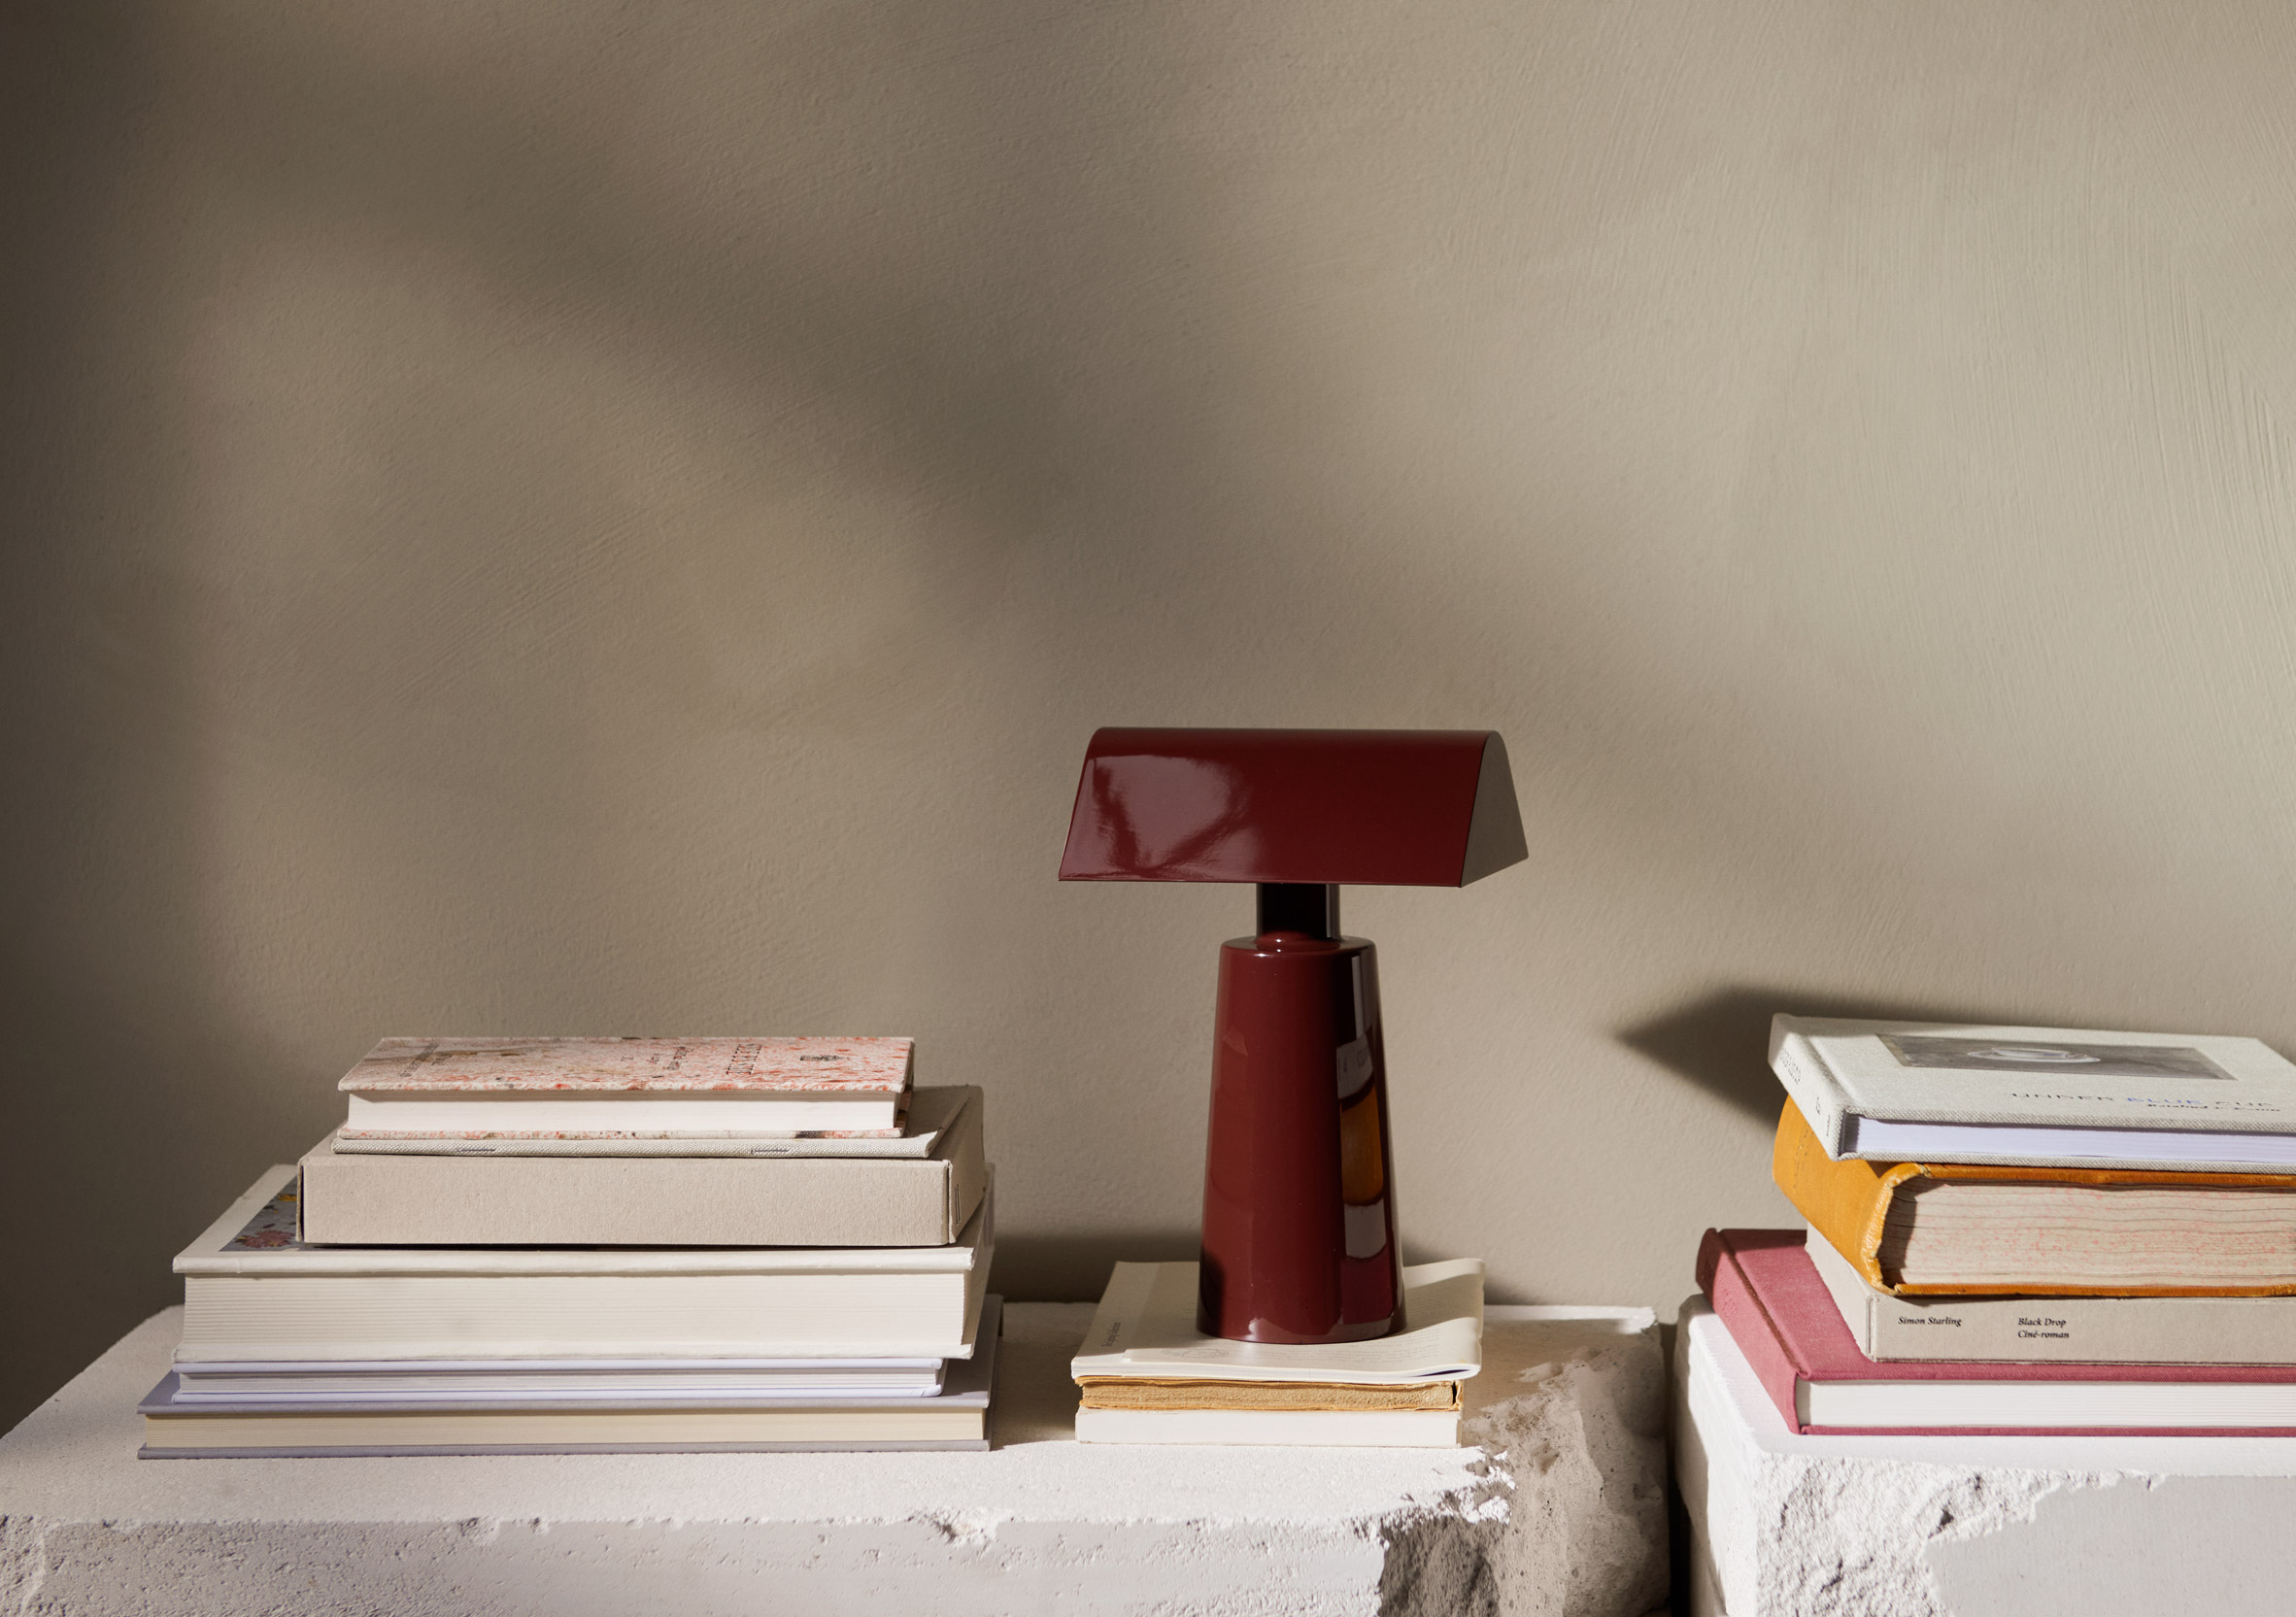 Caret table lamp by Matteo Fogale for &tradition